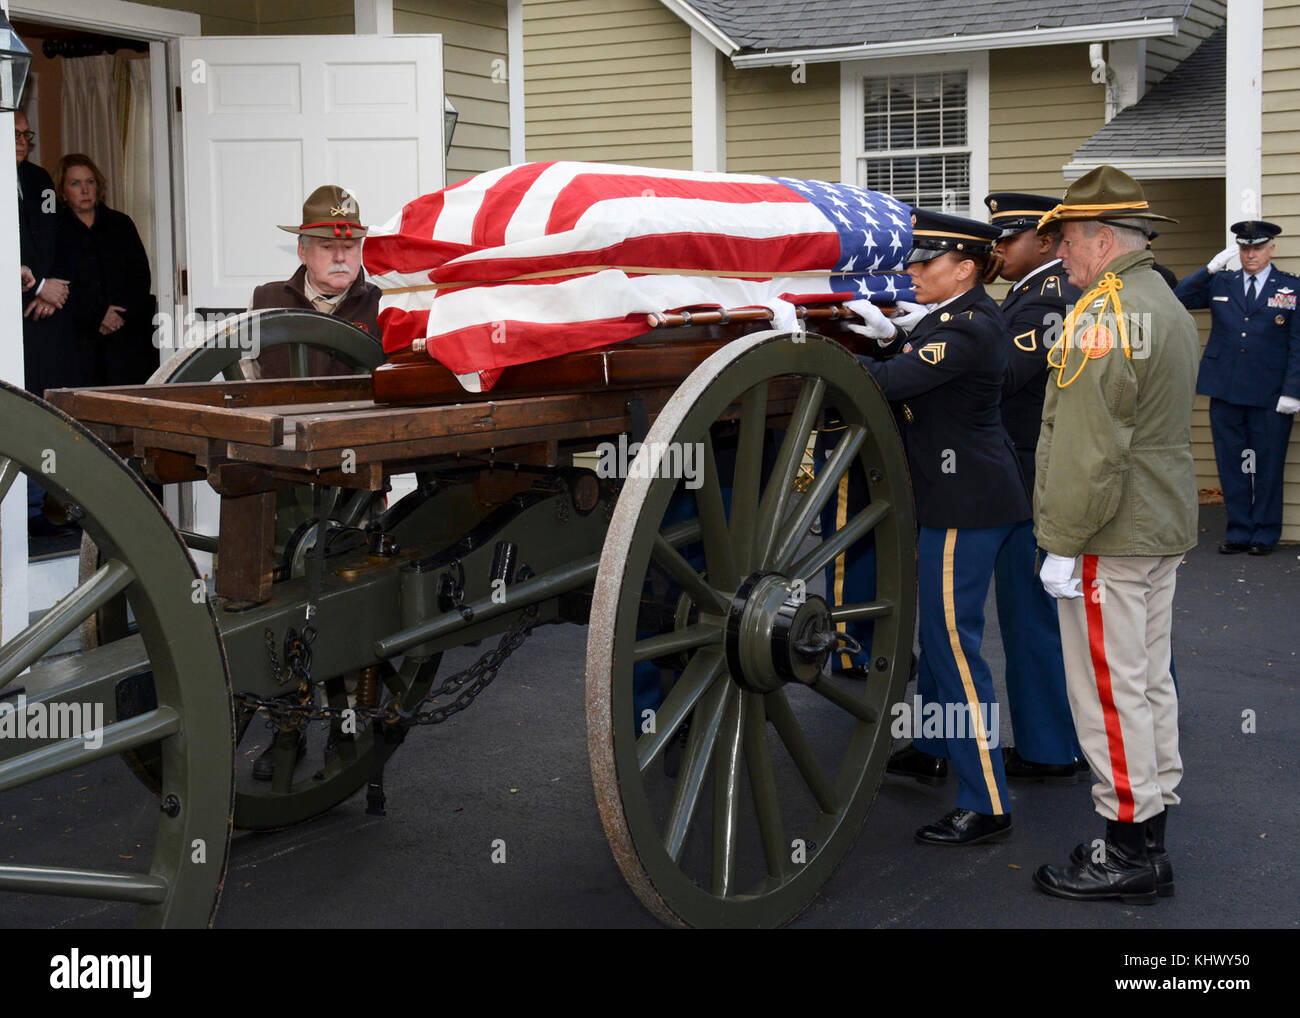 Concord, Mass. (Nov. 15, 2017) The Military Funeral Honors Team of the Massachusetts Army National Guard loads the casket of Medal of Honor recipient Capt. Thomas J. Hudner, Jr., onto a horse-drawn carriage during a funeral procession in Capt. Hudner’s honor. Capt. Hudner, a naval aviator, received the Medal of Honor for his actions during the Battle of the Chosin Reservoir during the Korean War. Stock Photo